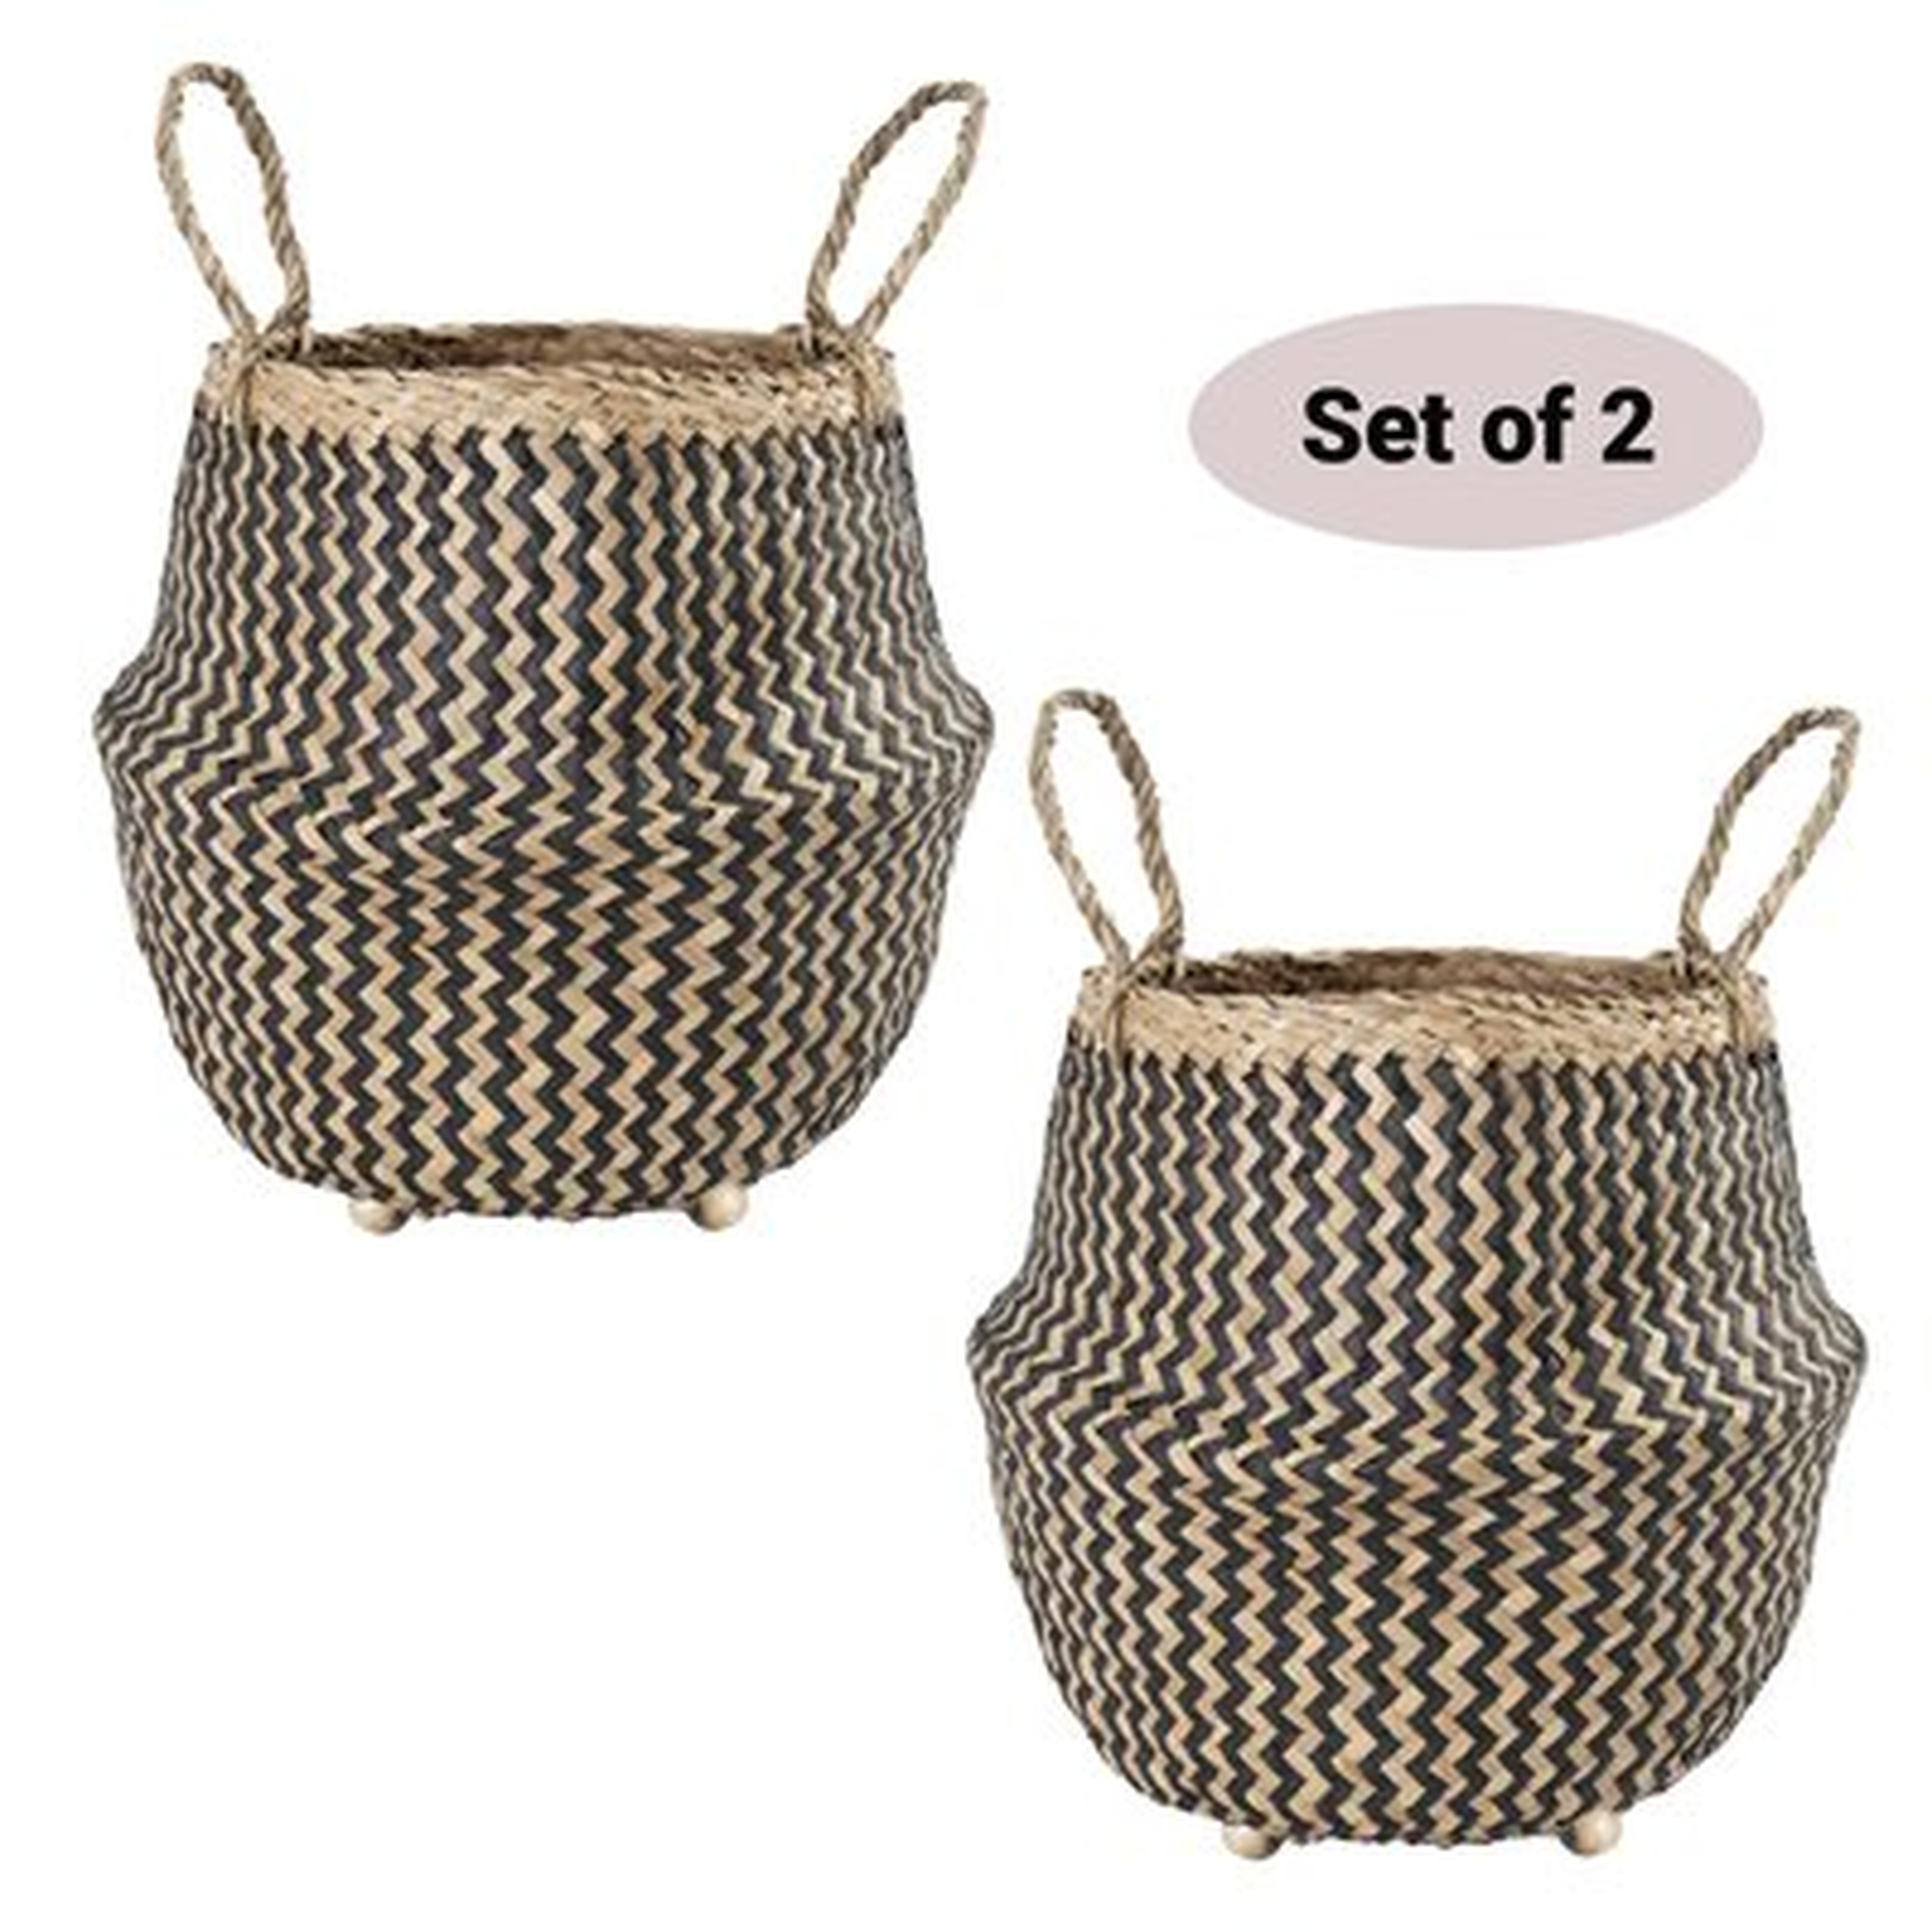 Set Of 2 D9.8Xh9.8" Seagrass Belly Basket W Handles | Beaded Planters Pot Cover For Indoor Plants - Nursery & Playroom Storage Bins - Wicker Hampers For Laundry - Decorative Basket For Farmhouse Decor & Rustic Harvest Basket - By Madeterra (Black Zigzag) - Wayfair